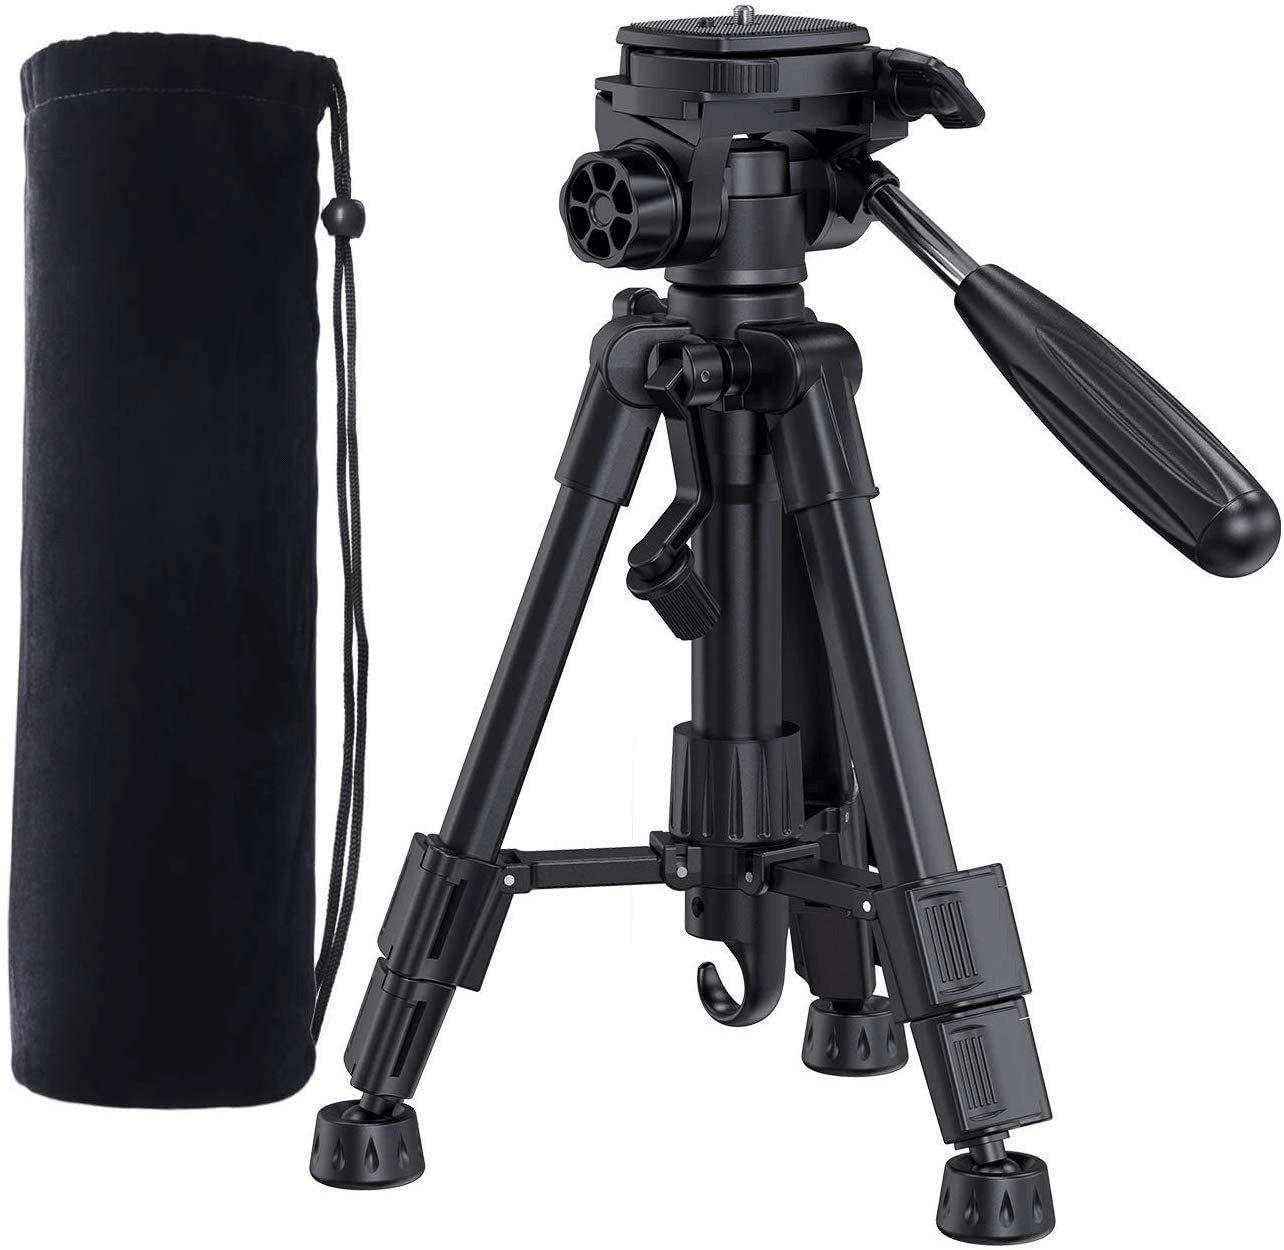 Bomaker BY388 Adjustable Tripod for Projector, Camera, DSRL, 360 Degree